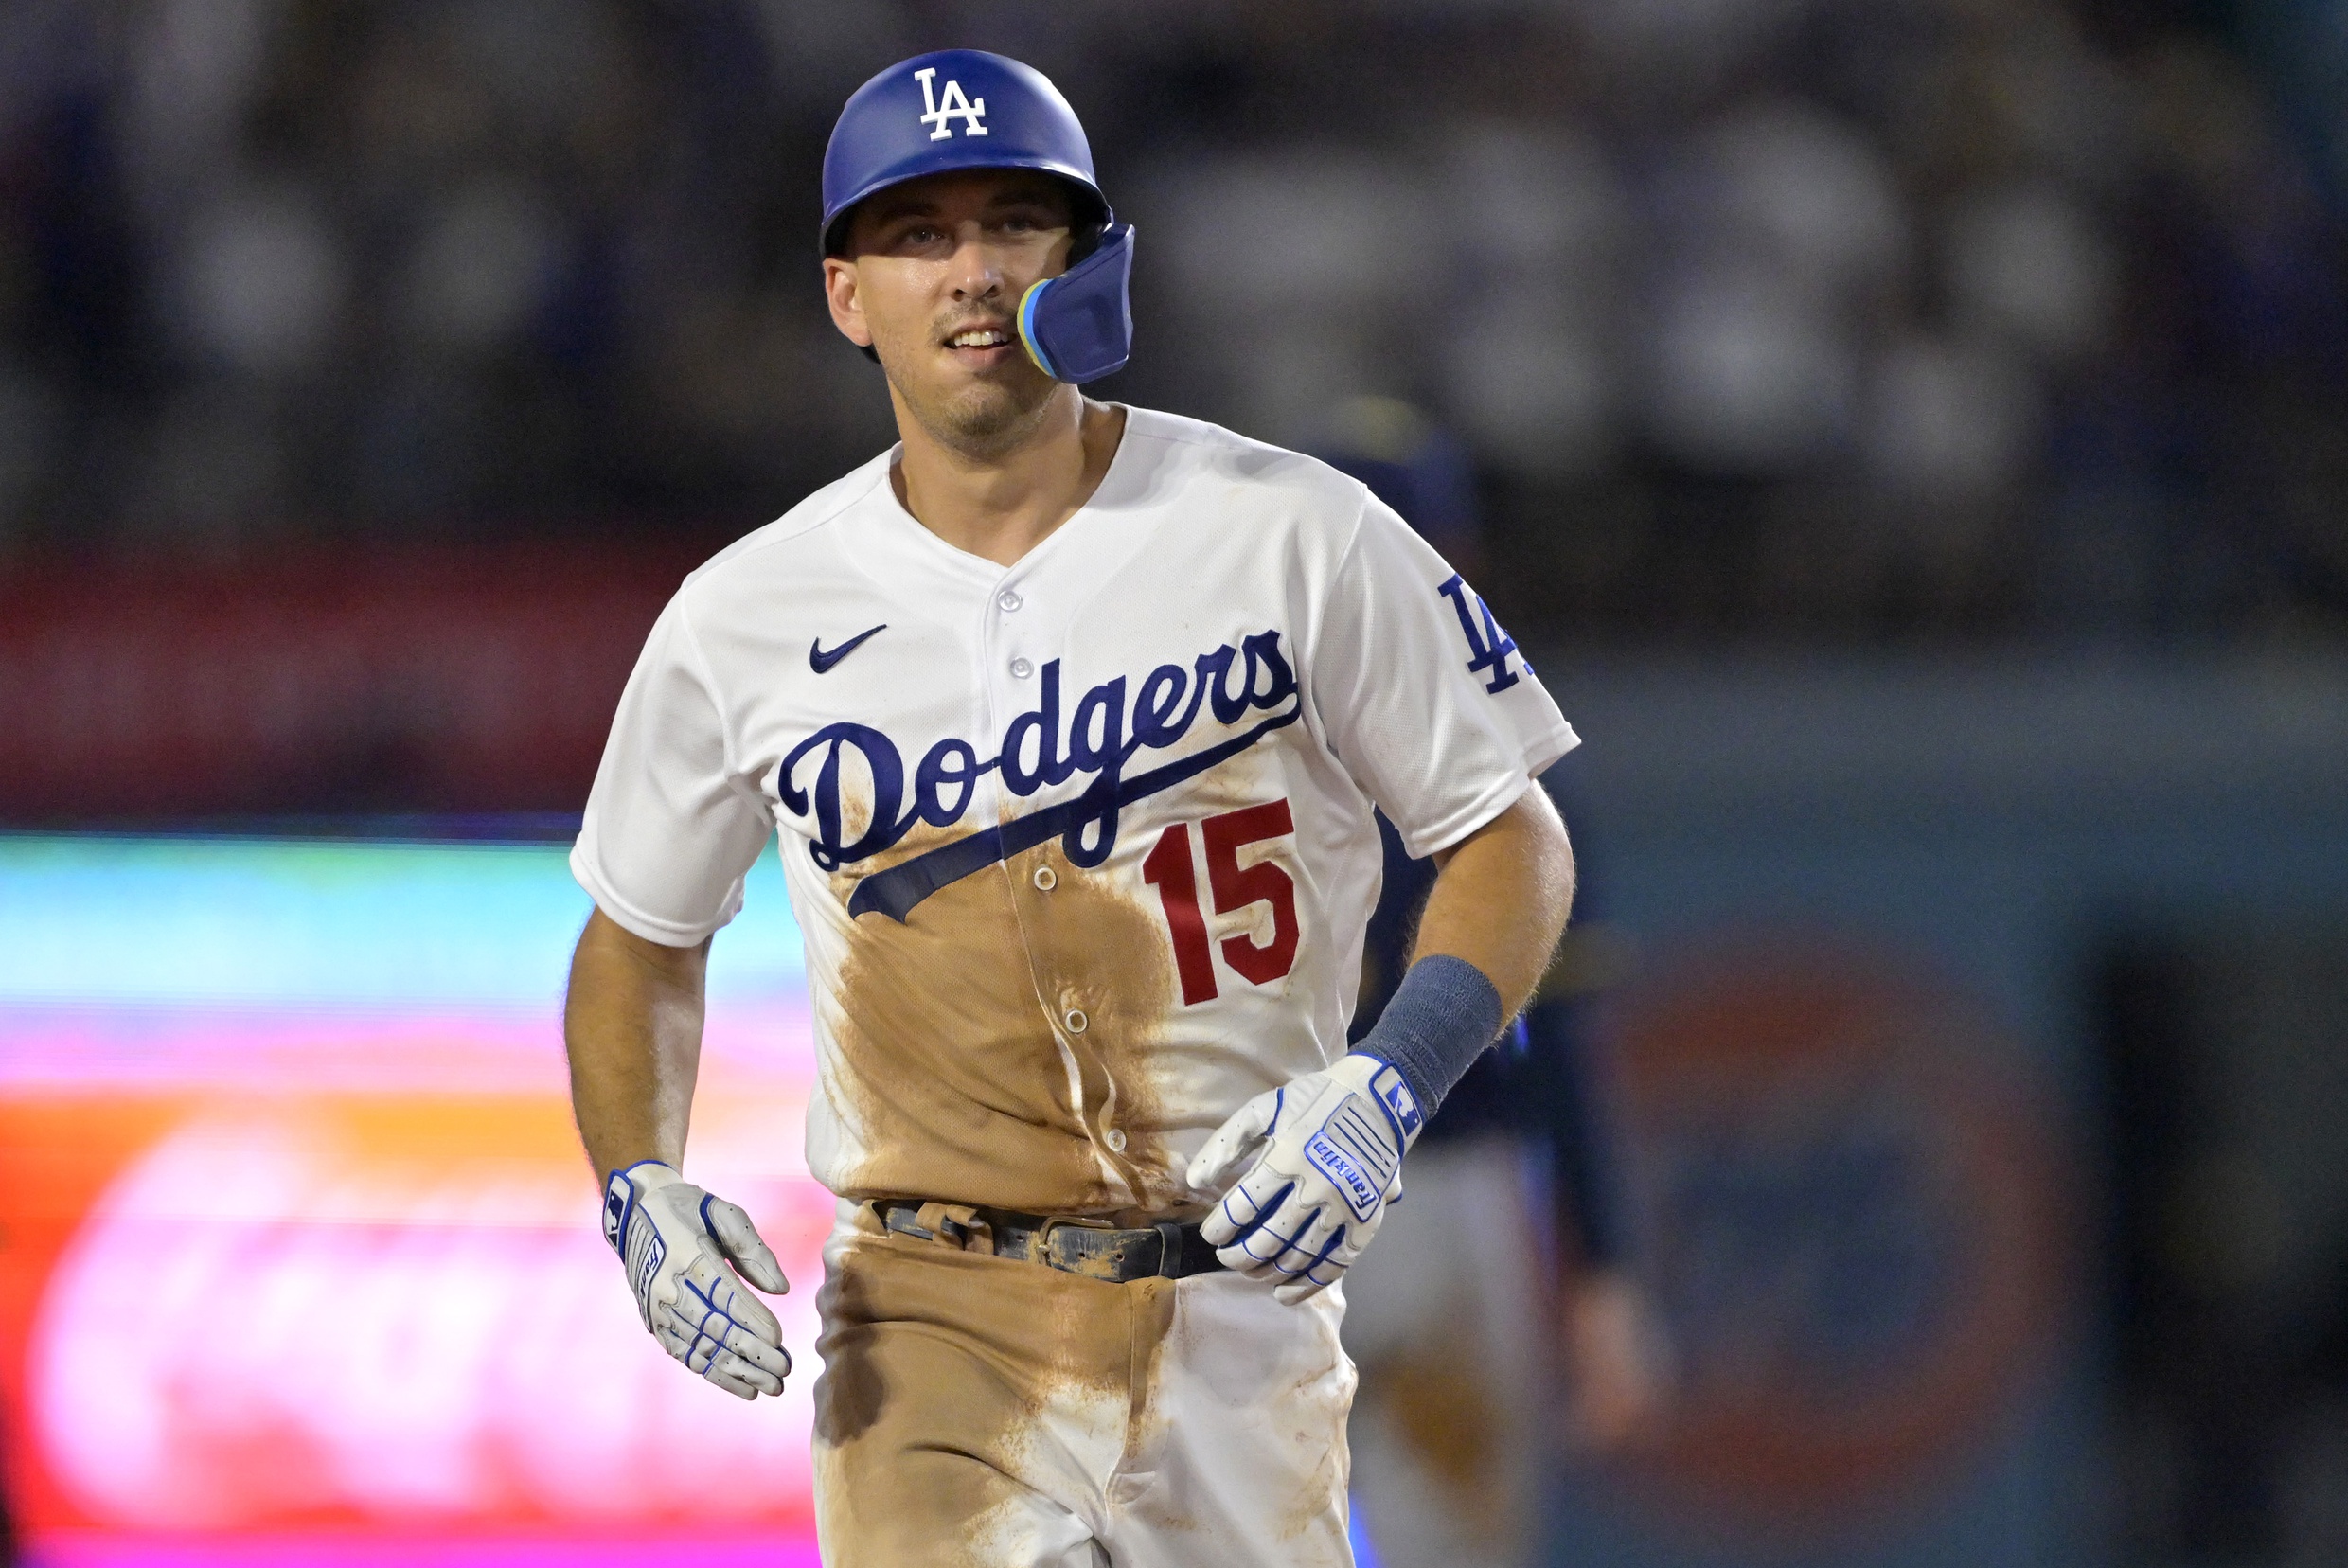 Dodgers C Austin Barnes takes foul ball to the manly region